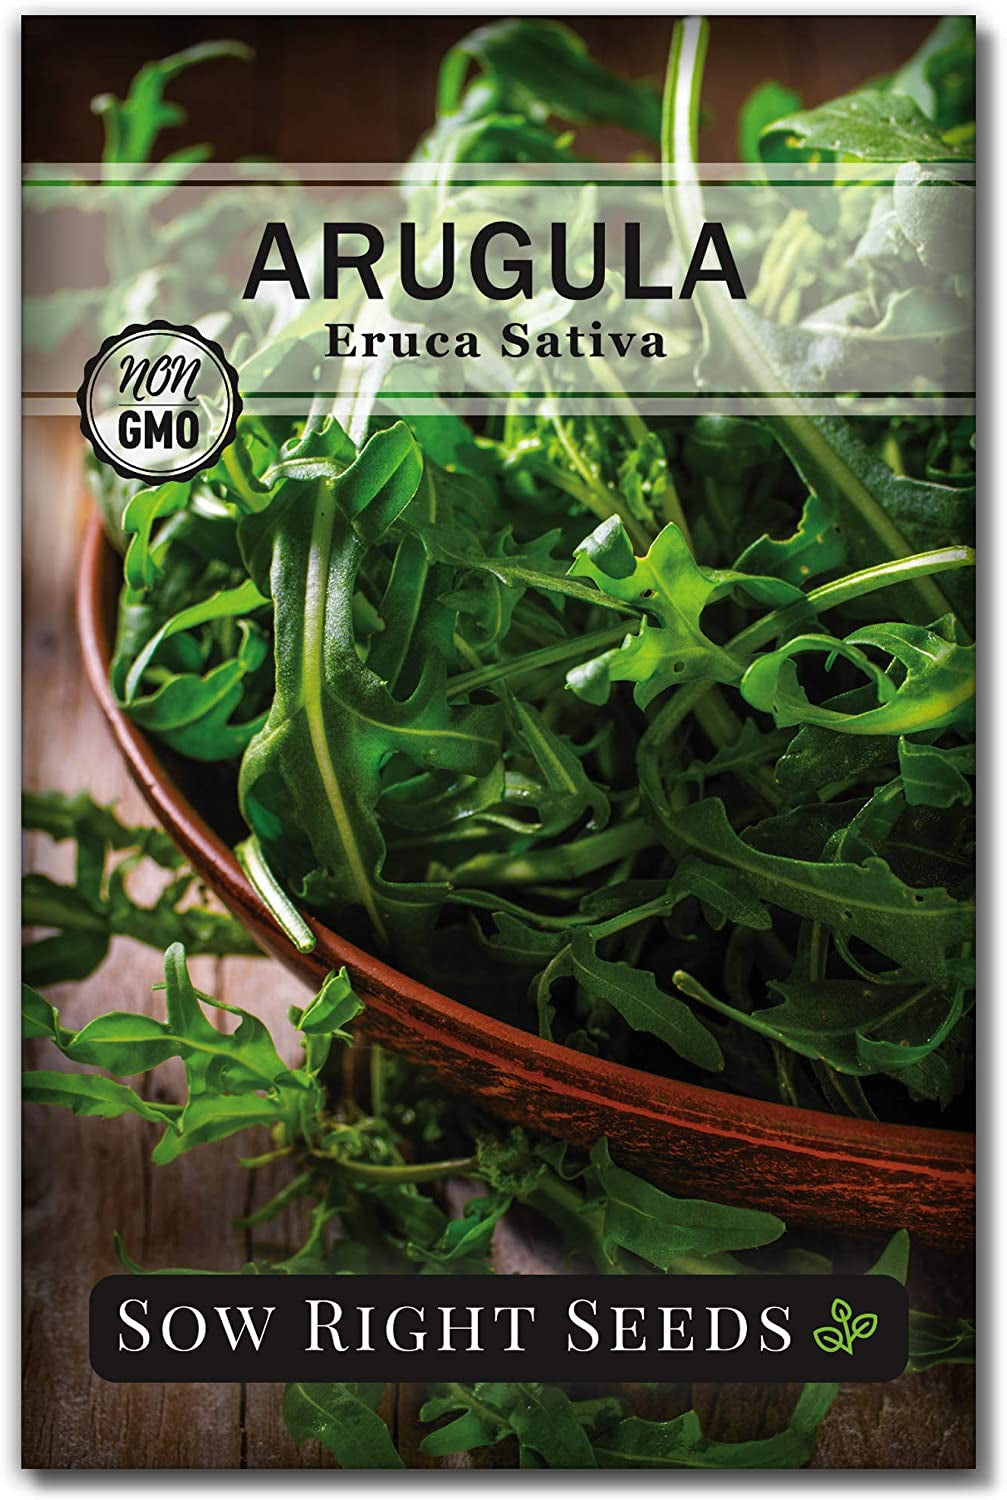 - Arugula Seeds for Planting - Non-Gmo Heirloom Seeds with Instructions to Plant a Home Vegetable Garden - Indoors, Hydroponics or Outdoors - Salad Greens - Grow Kitchen Herbs (1)